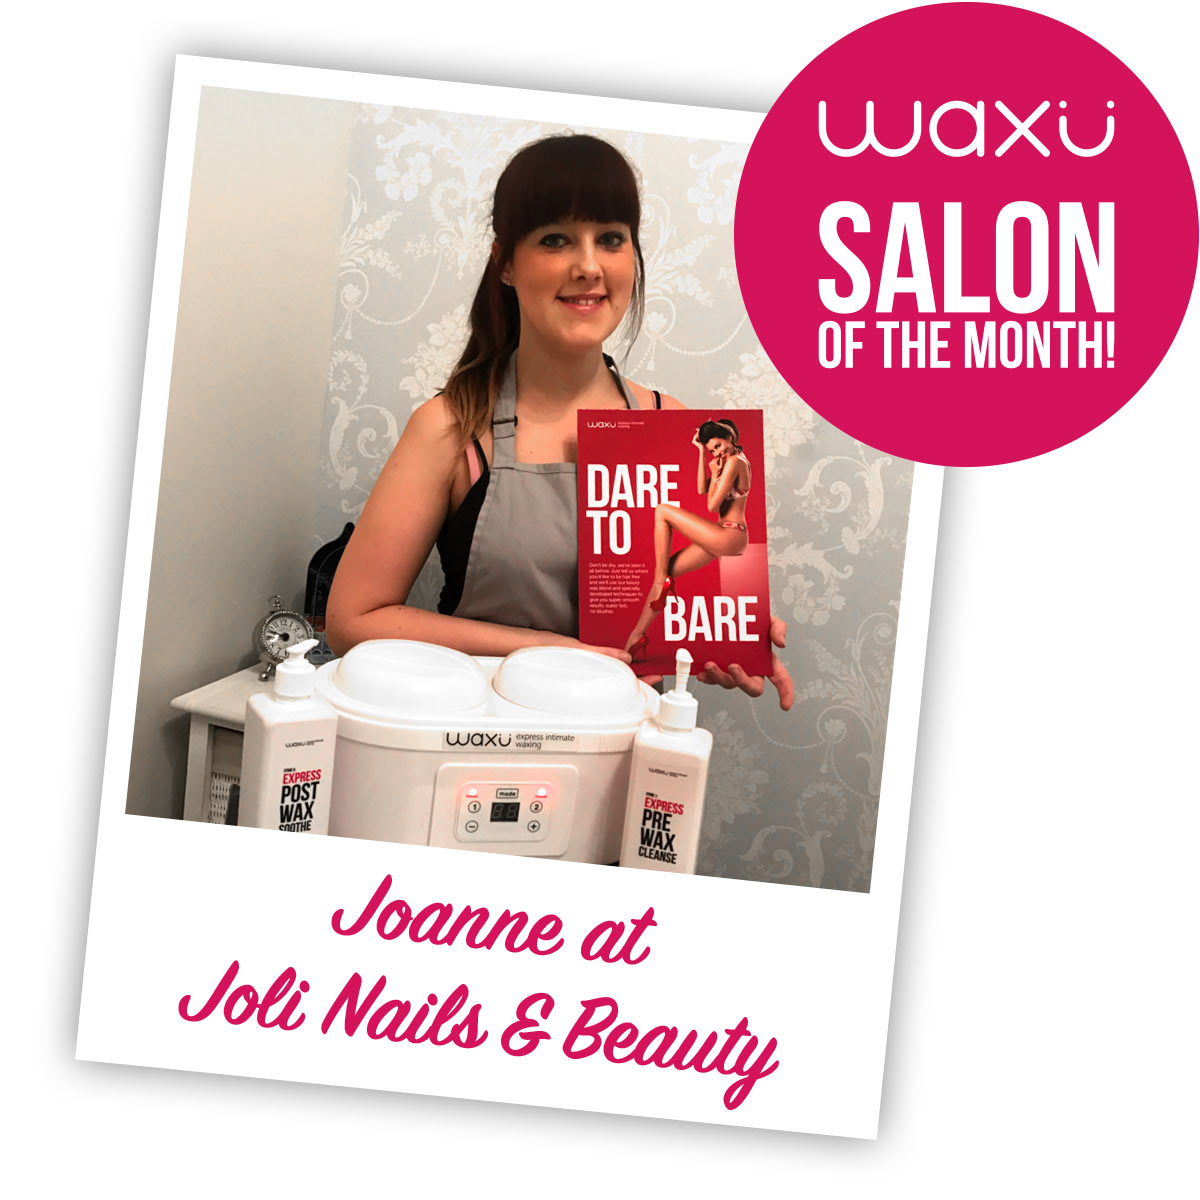 Waxu-Salon-of-the-Month-August-2017